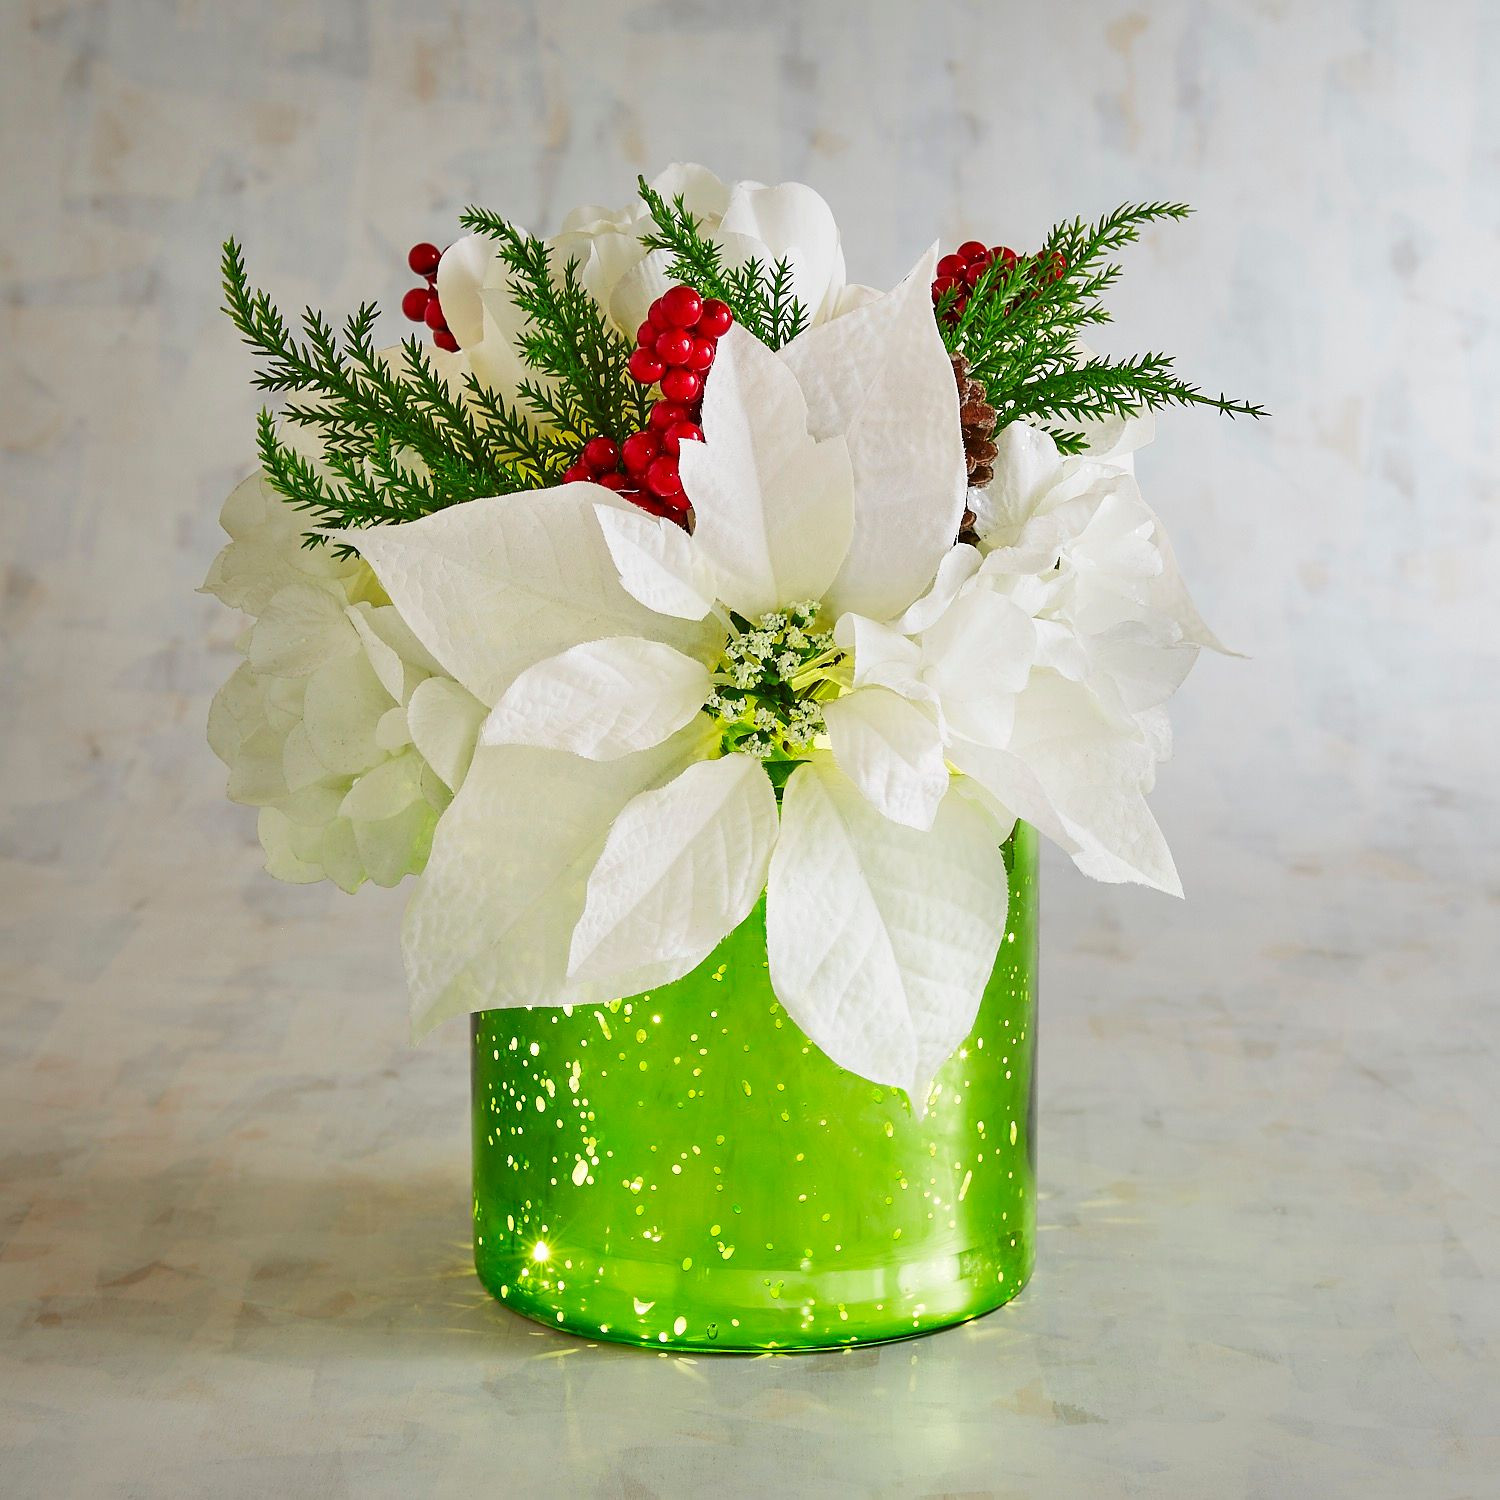 24 Stylish Pier 1 Flower Vases 2023 free download pier 1 flower vases of make a statement pier 1 imports within prearranged flower centerpiece prearranged flower centerpiece with leds